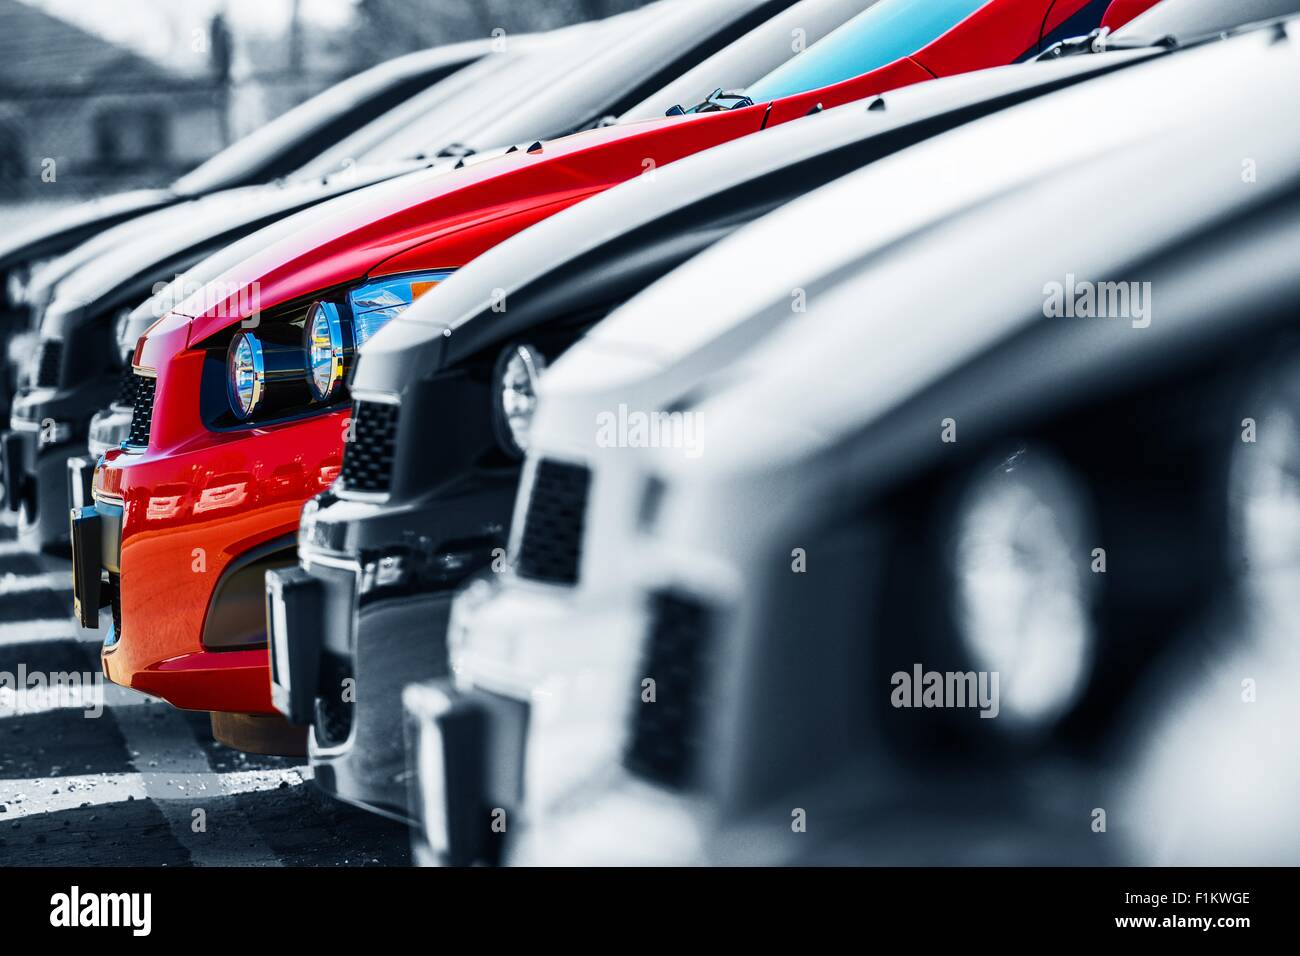 The One. Car Choice. Cars Stock with Only One Red Car. One Special Car Stock Photo